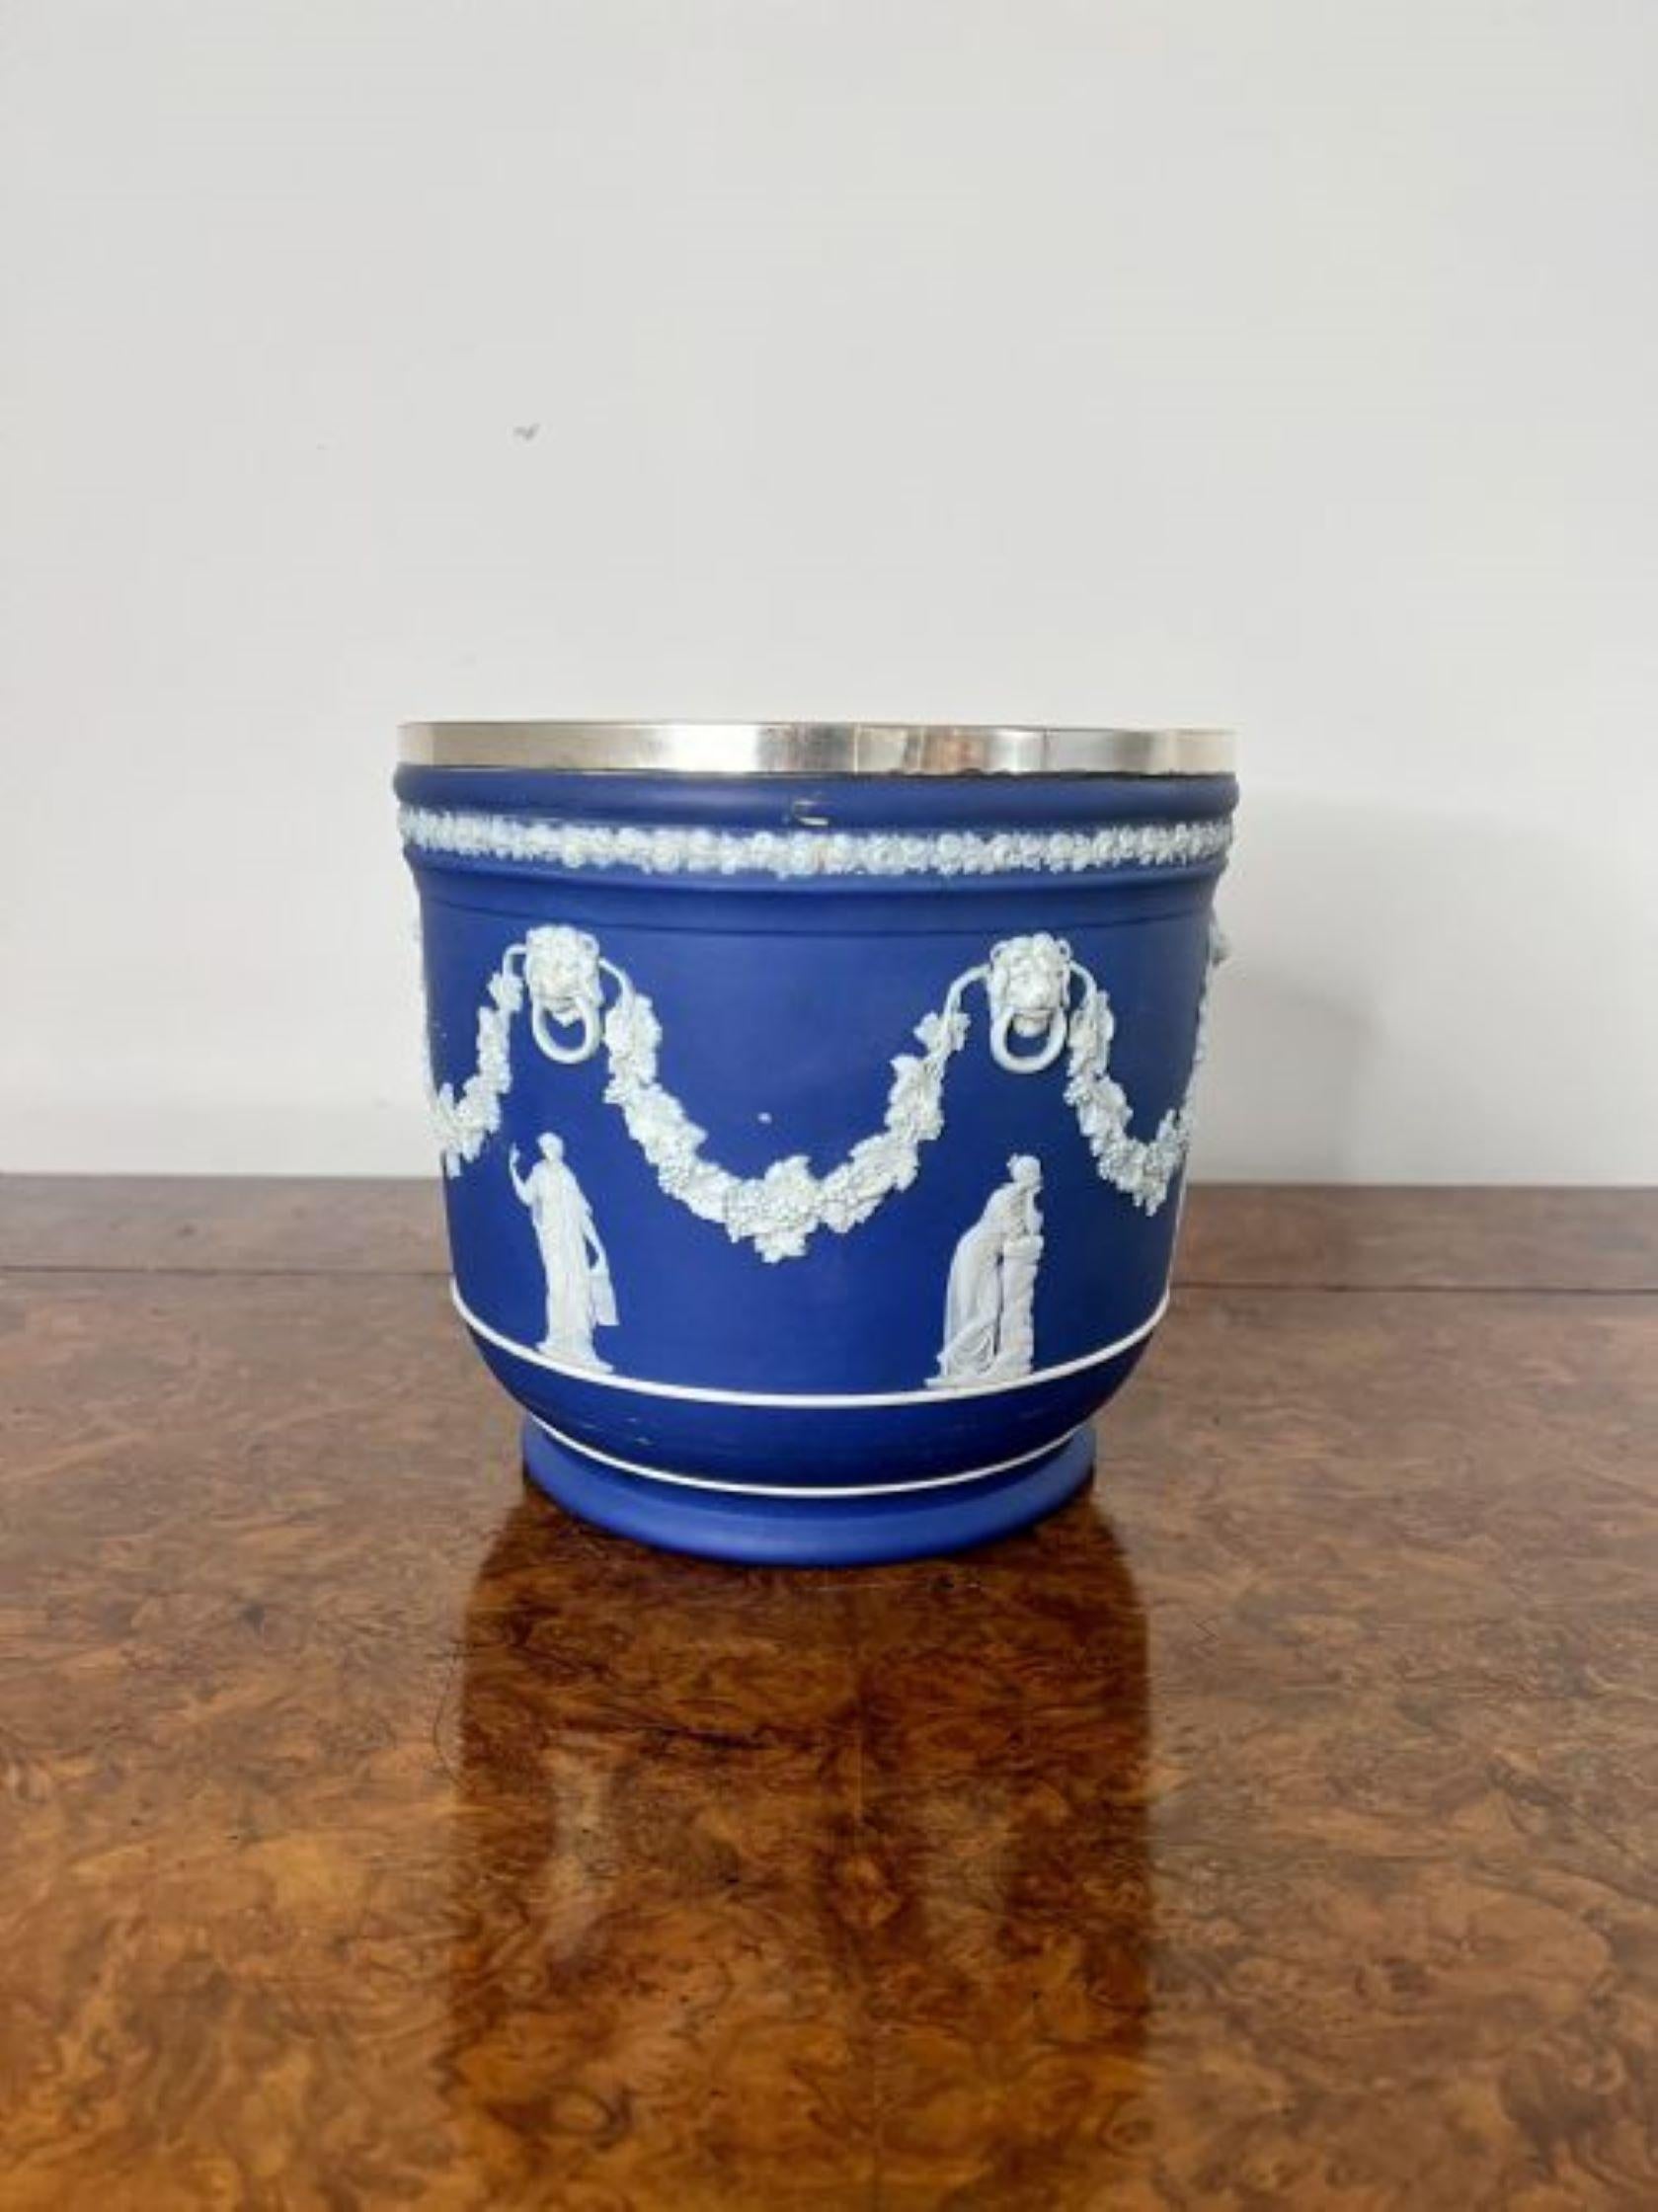 Stunning quality antique Edwardian Wedgwood jardiniere having a stunning quality antique Edwardian Wedgwood jardiniere with a blue ground with white enamel decoration, circular in shape with a silver plated rim.
